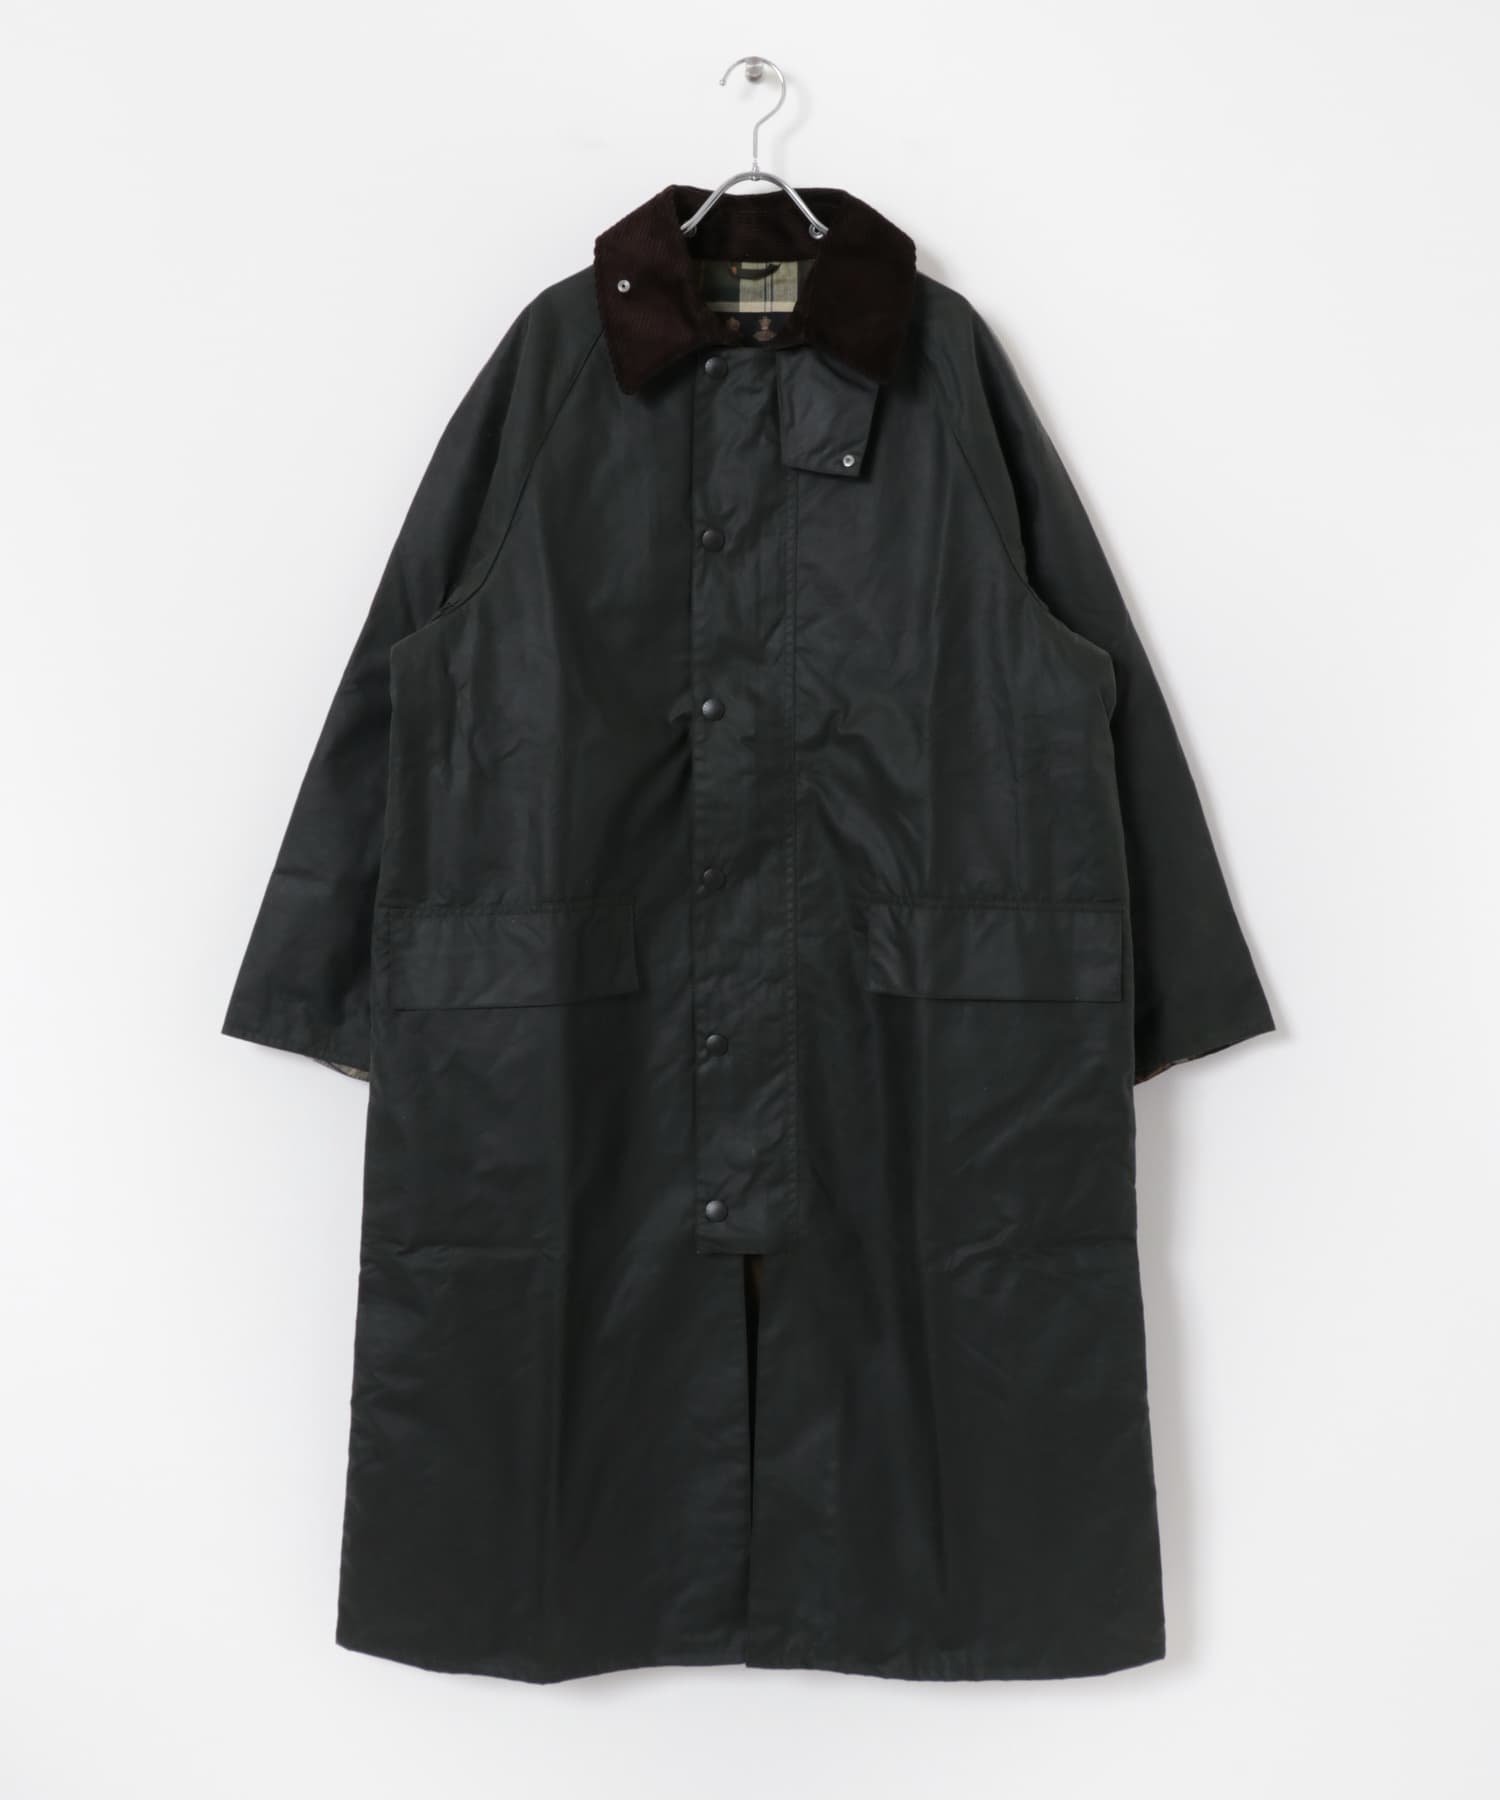 URBAN RESEARCH BUYERS SELECT Barbour os wax burghley ユーアールビーエス ジャケット・アウター その他のジャケット・アウター ブラック